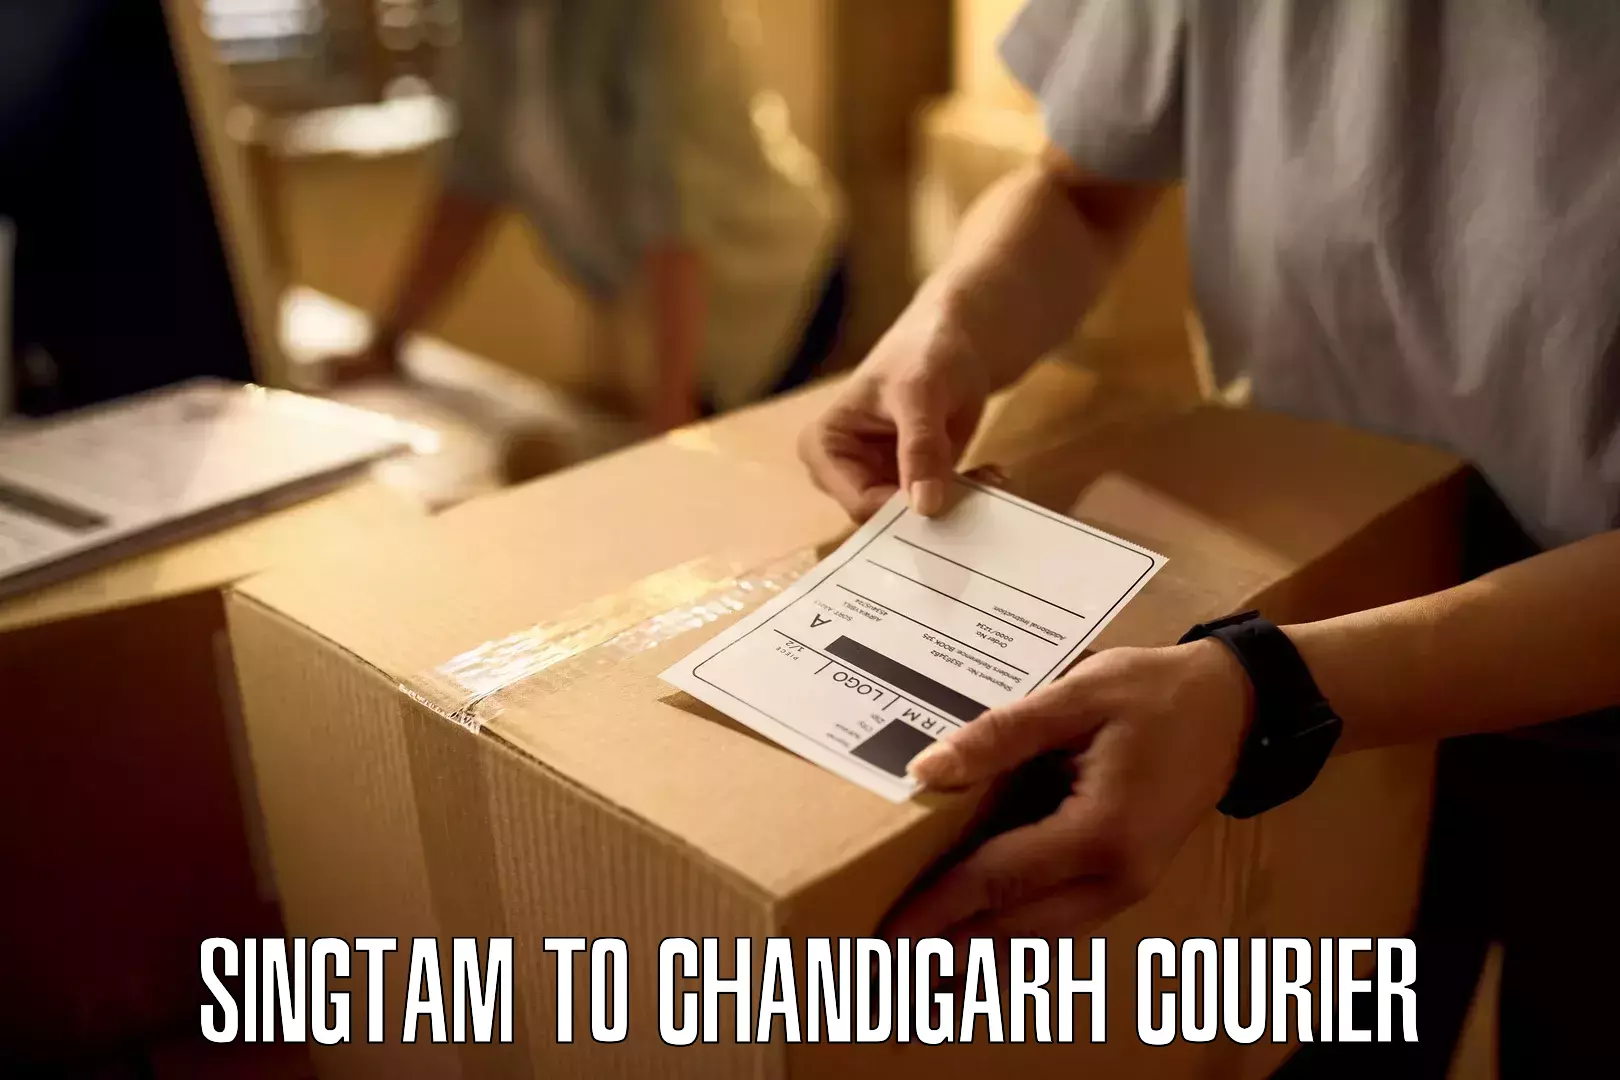 Custom courier packages Singtam to Chandigarh